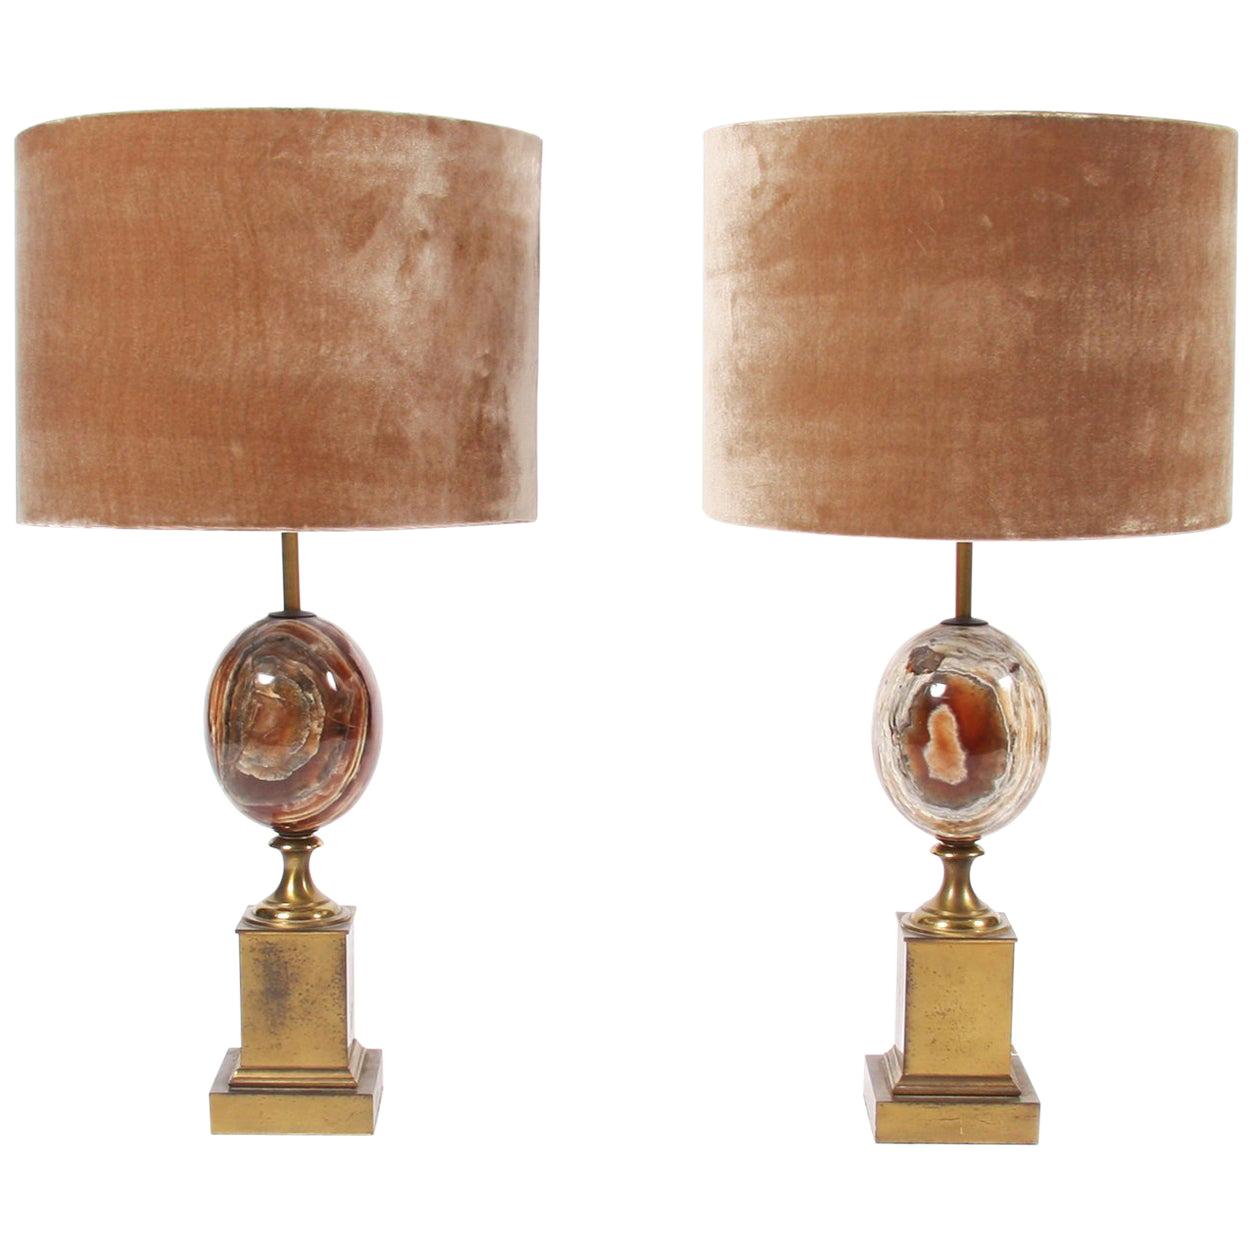 Pair of Marble and Brass Maison Charles Table Lamps, Paris, 1960s For Sale